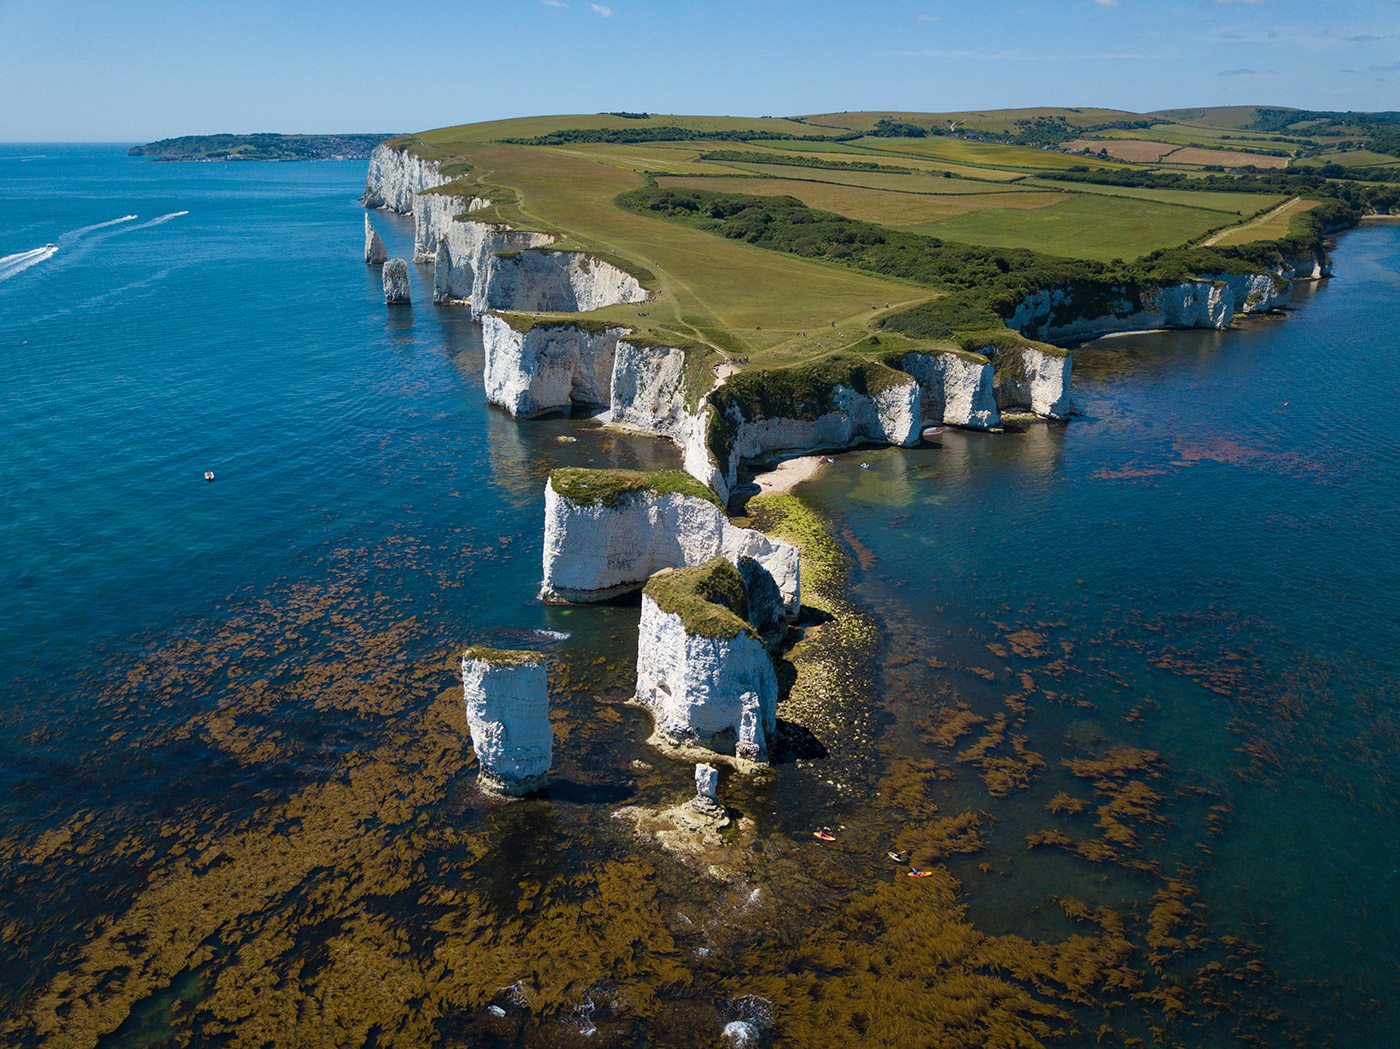 The Foreland and Old Harry